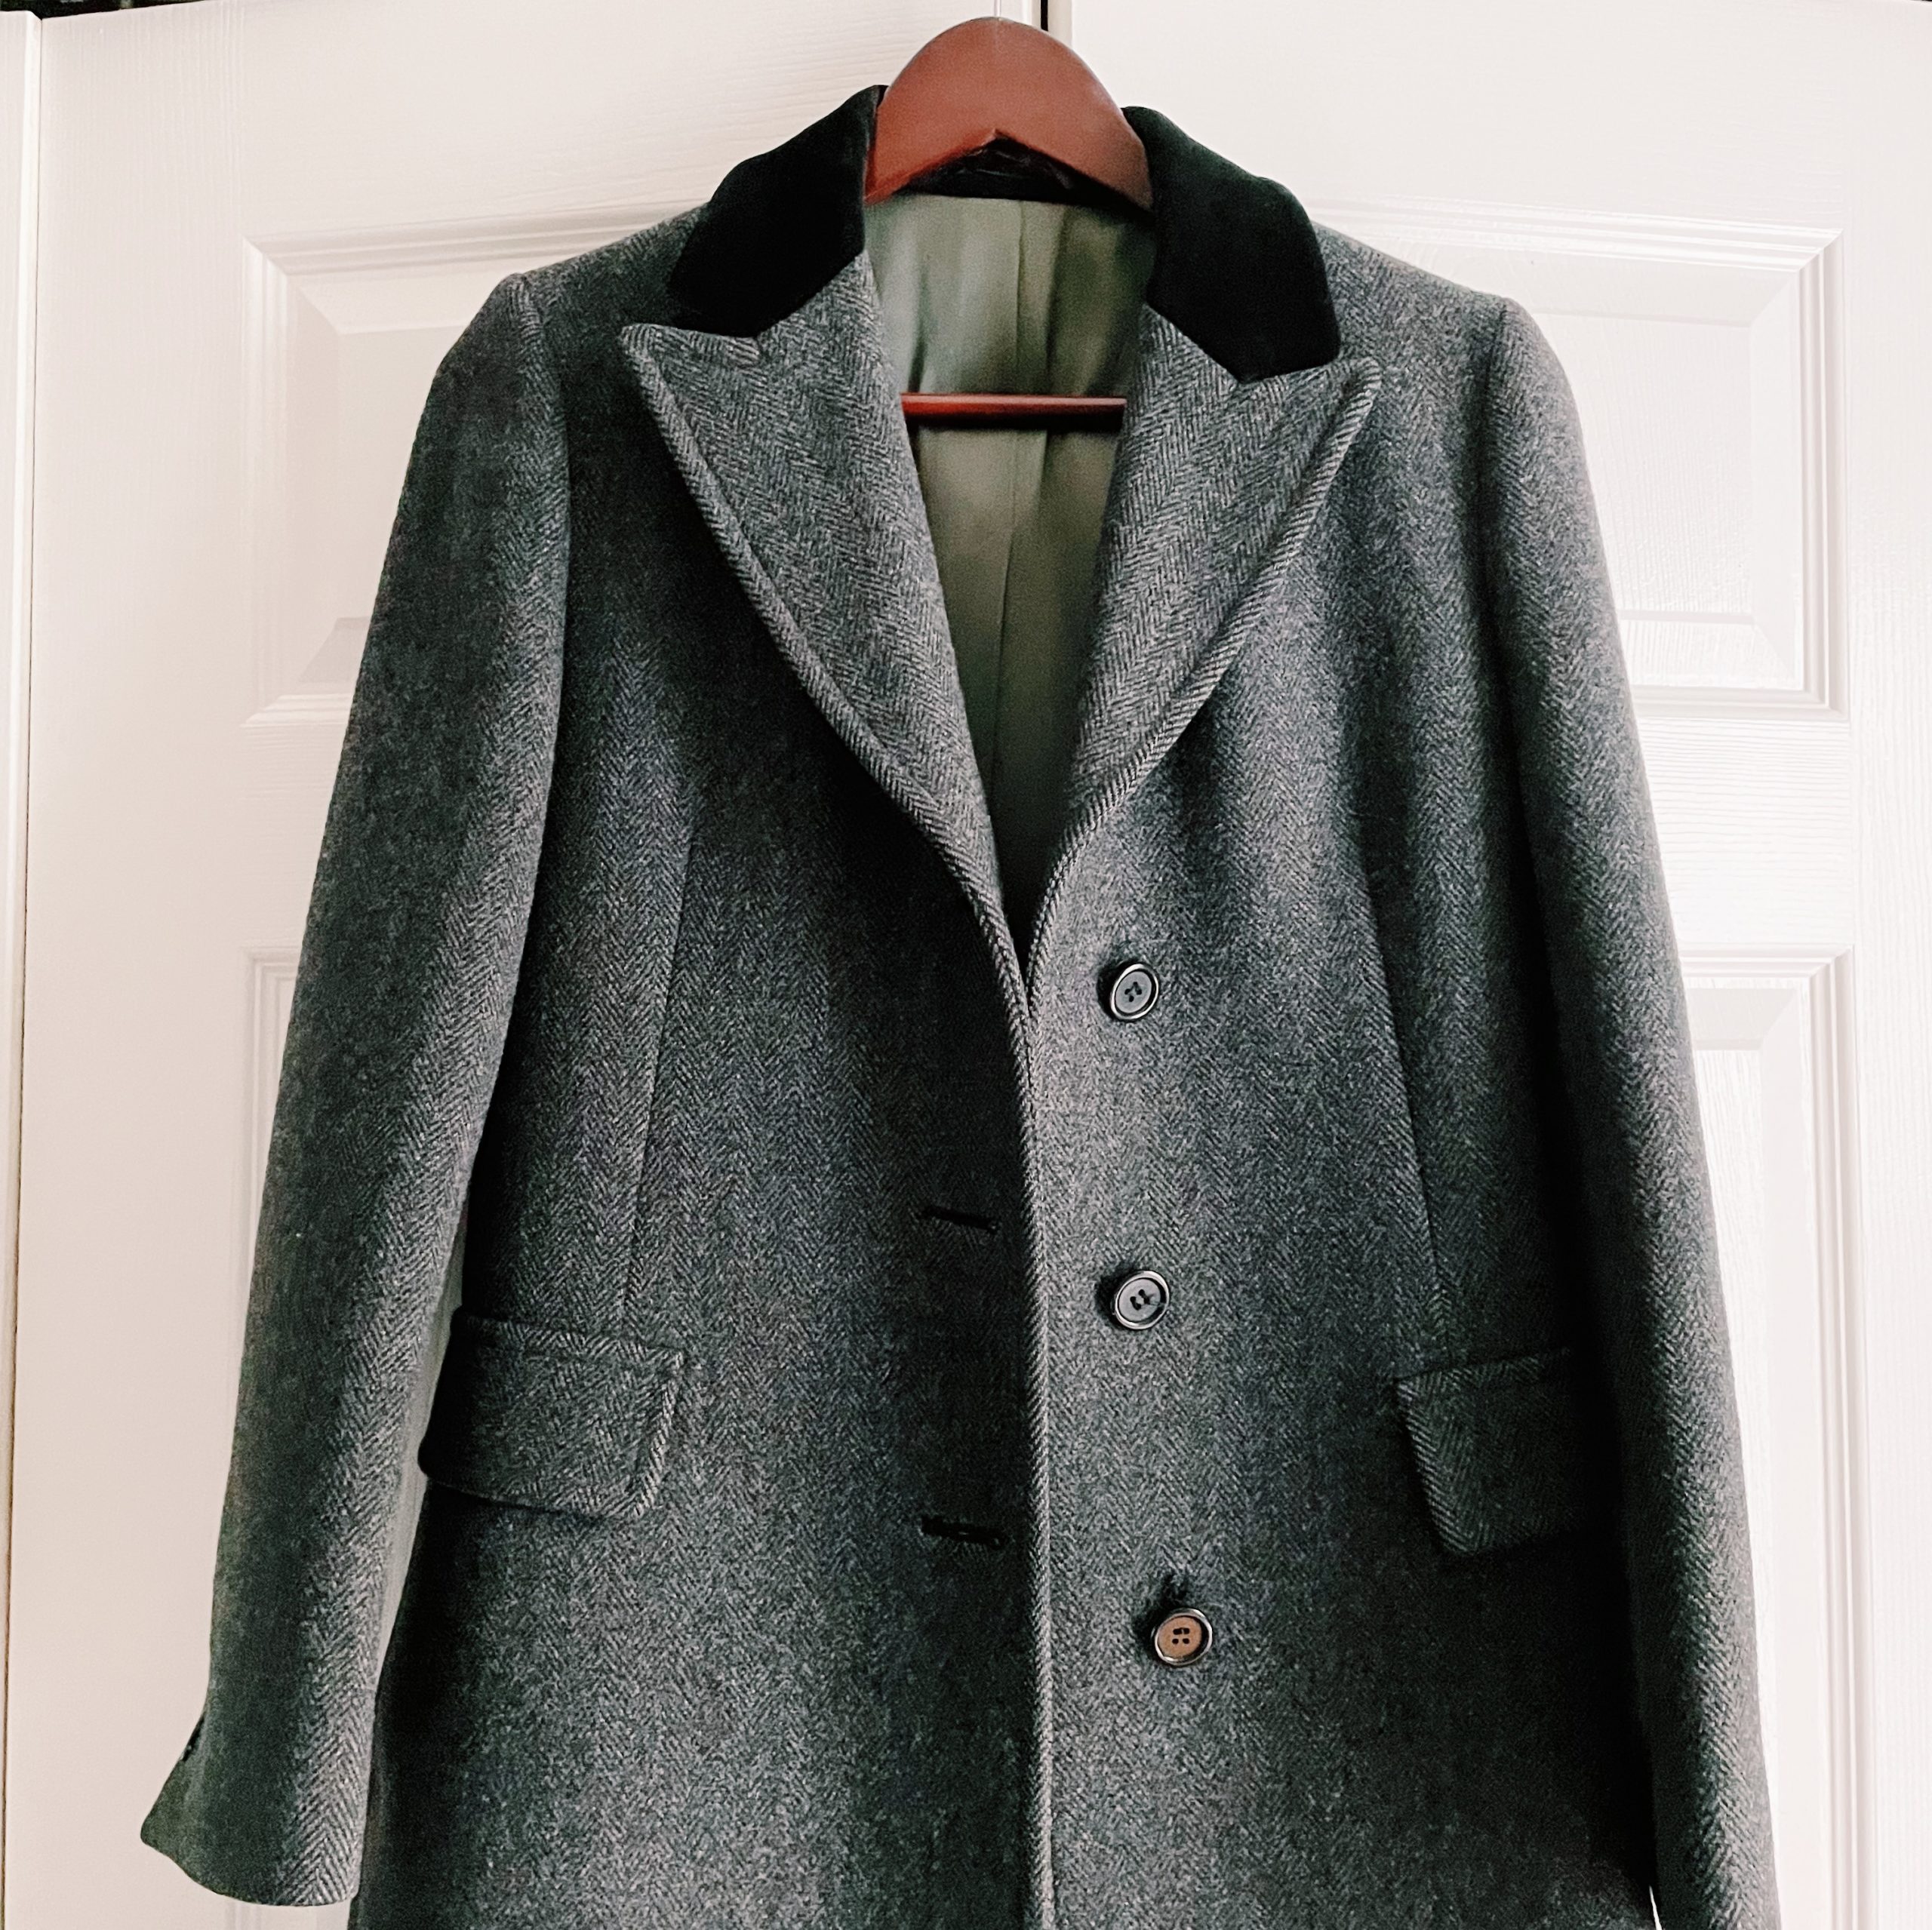 The Search for a Grey Overcoat